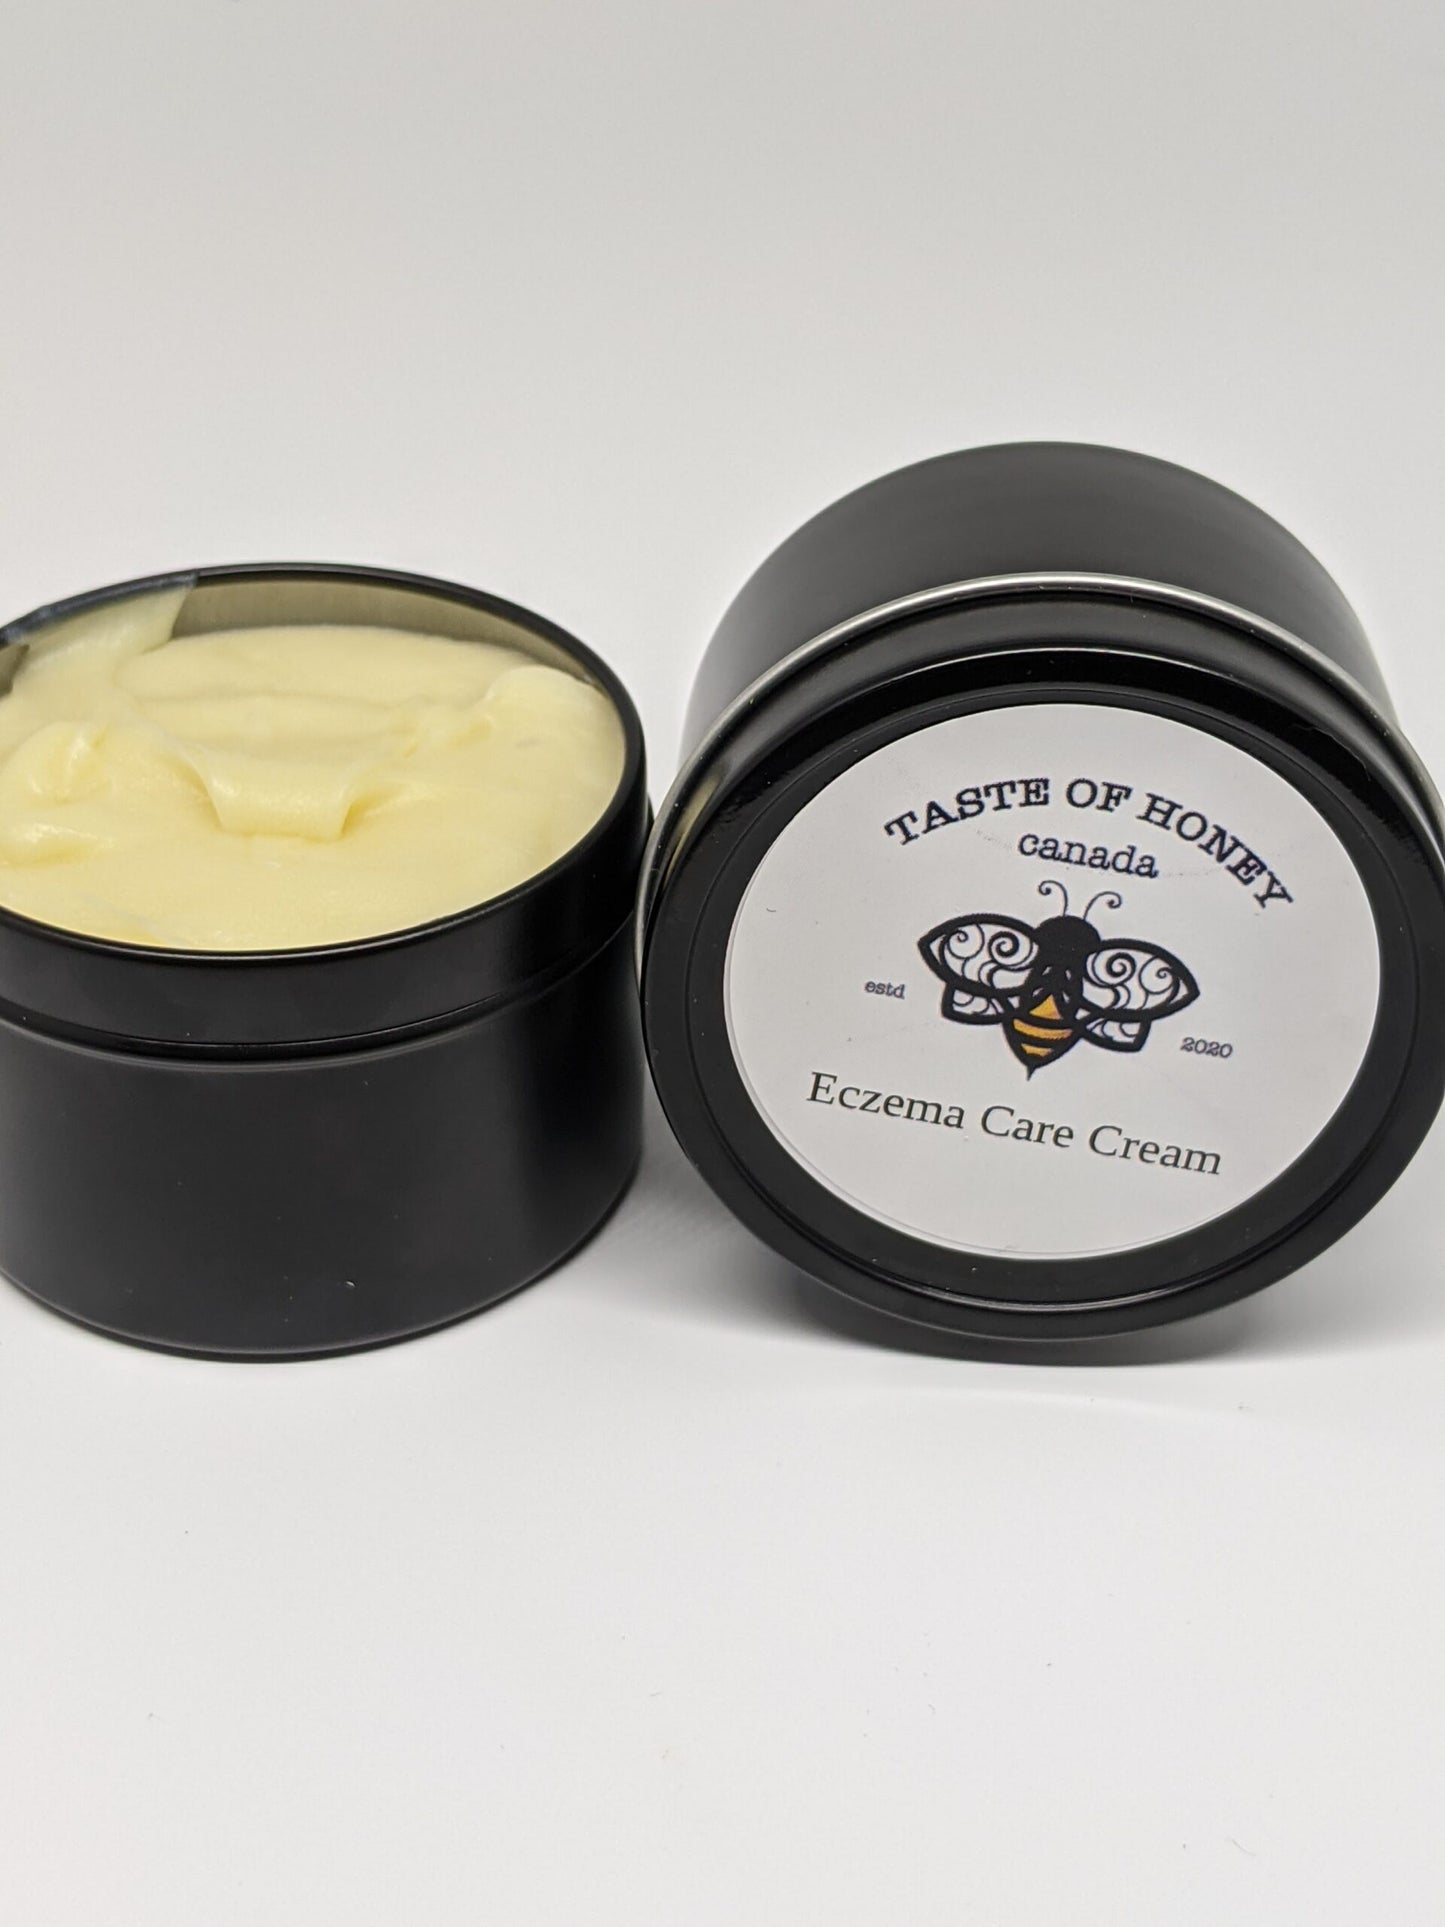 Eczema Care Body Butter.  Black tin, white label with bee logo